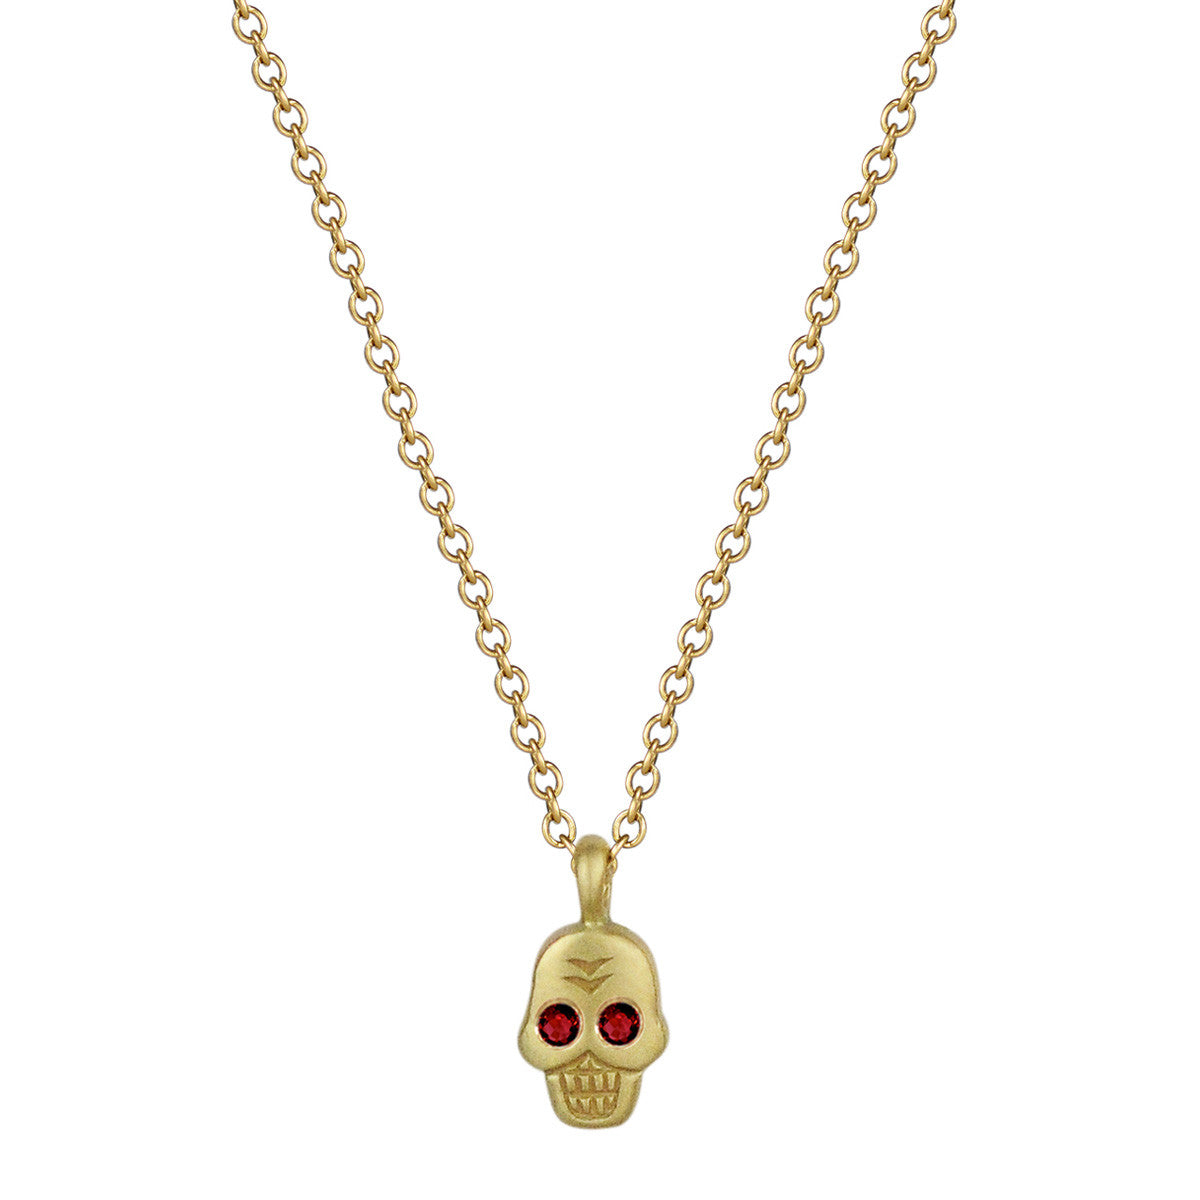 10pcs/lot Gold Plated Charms Lucky Skull,Lotus Root Pendant Alloy  Accessories diy Bracelets Necklace Charm